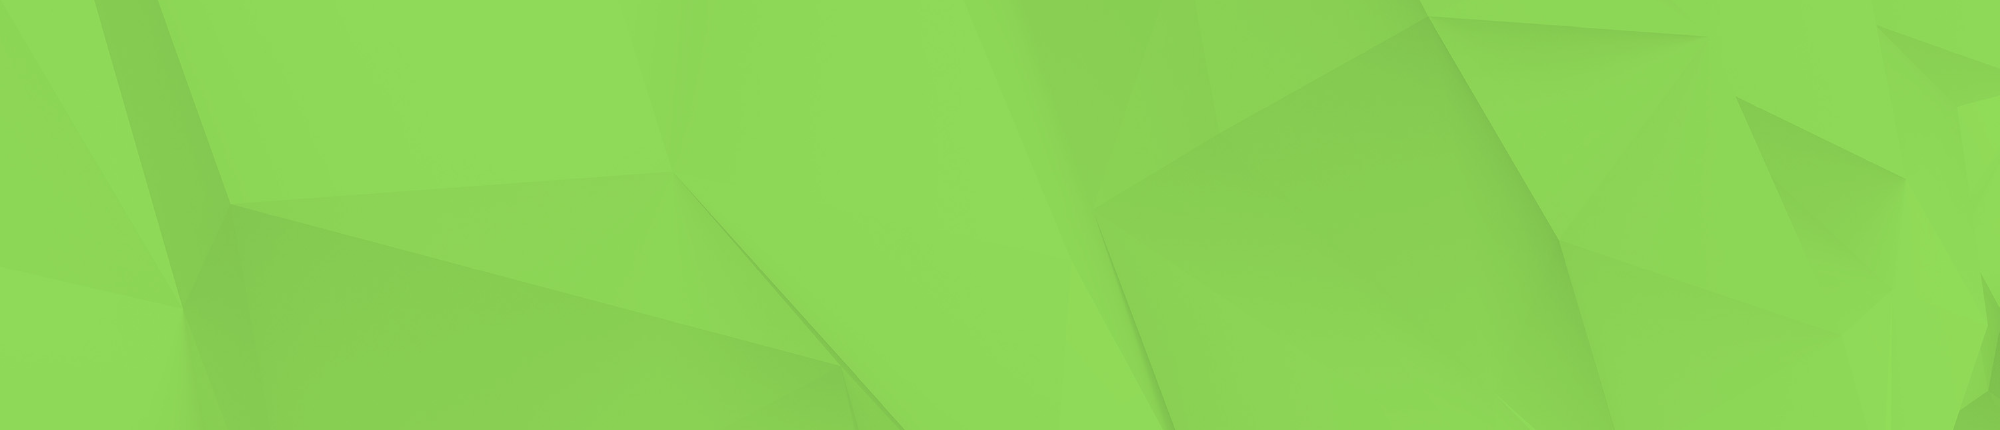 Podcast header in green